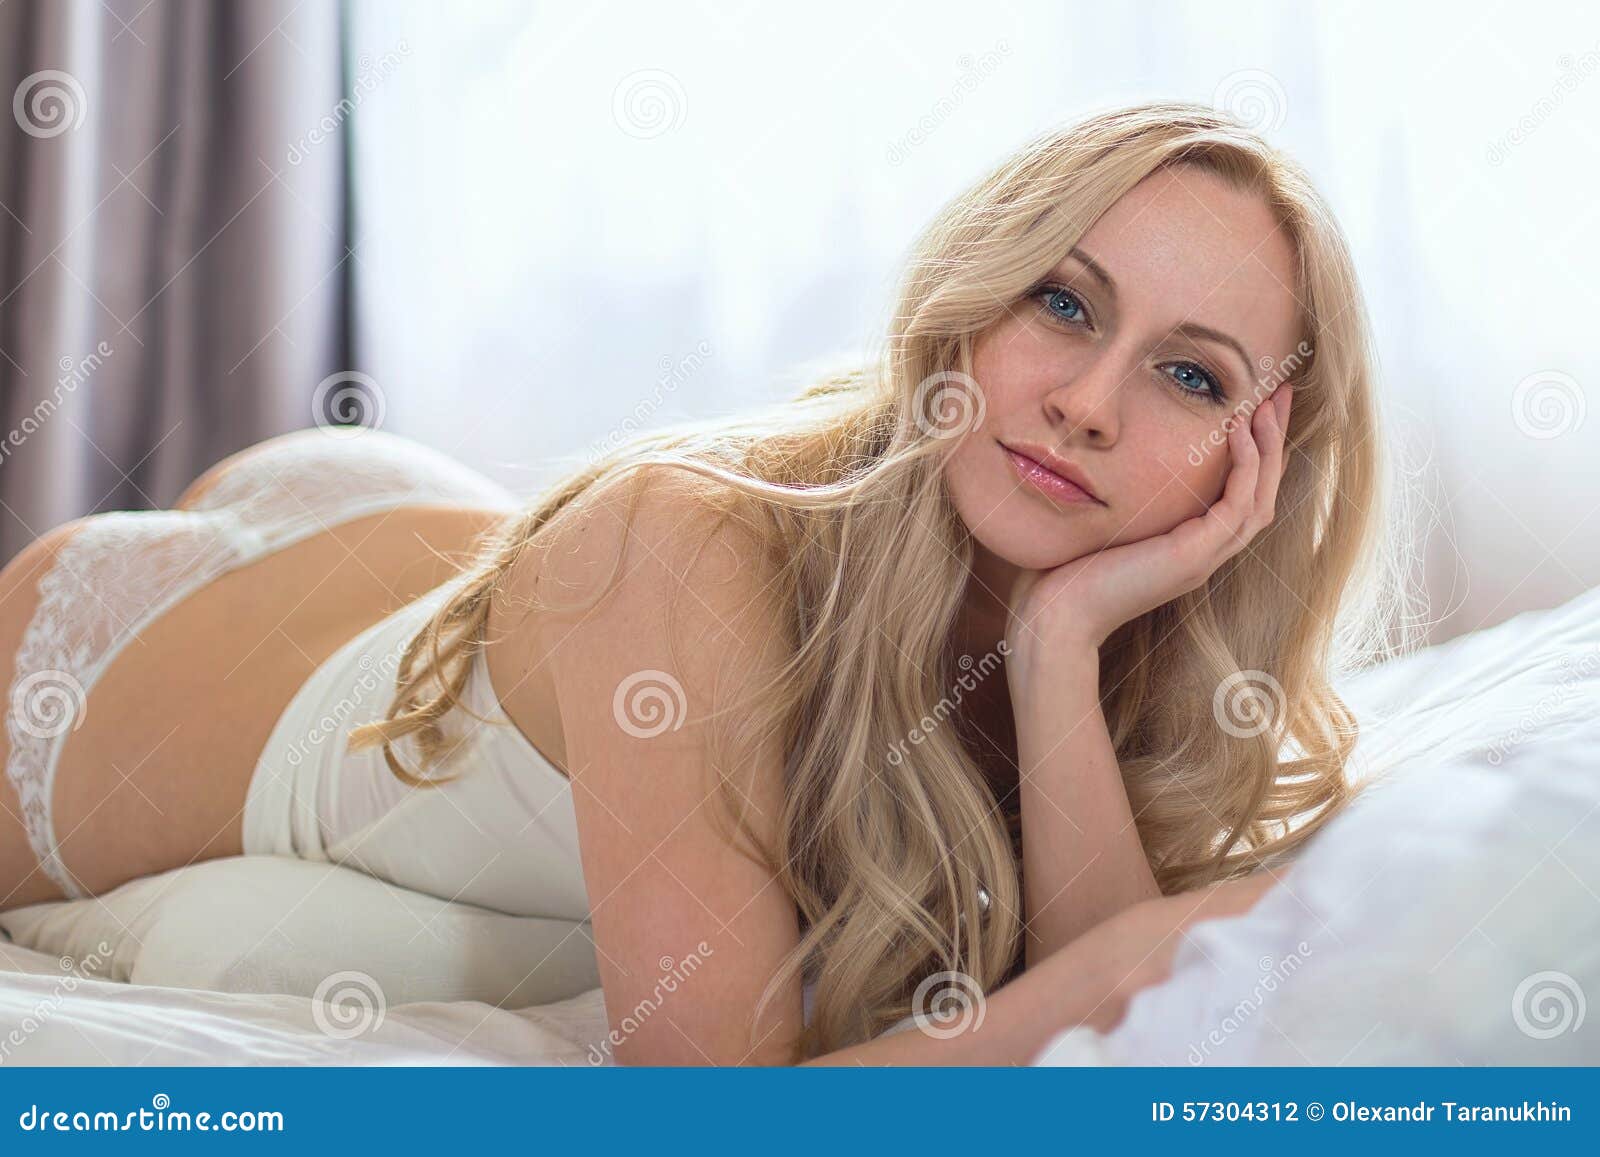 Blonde On Bed 32